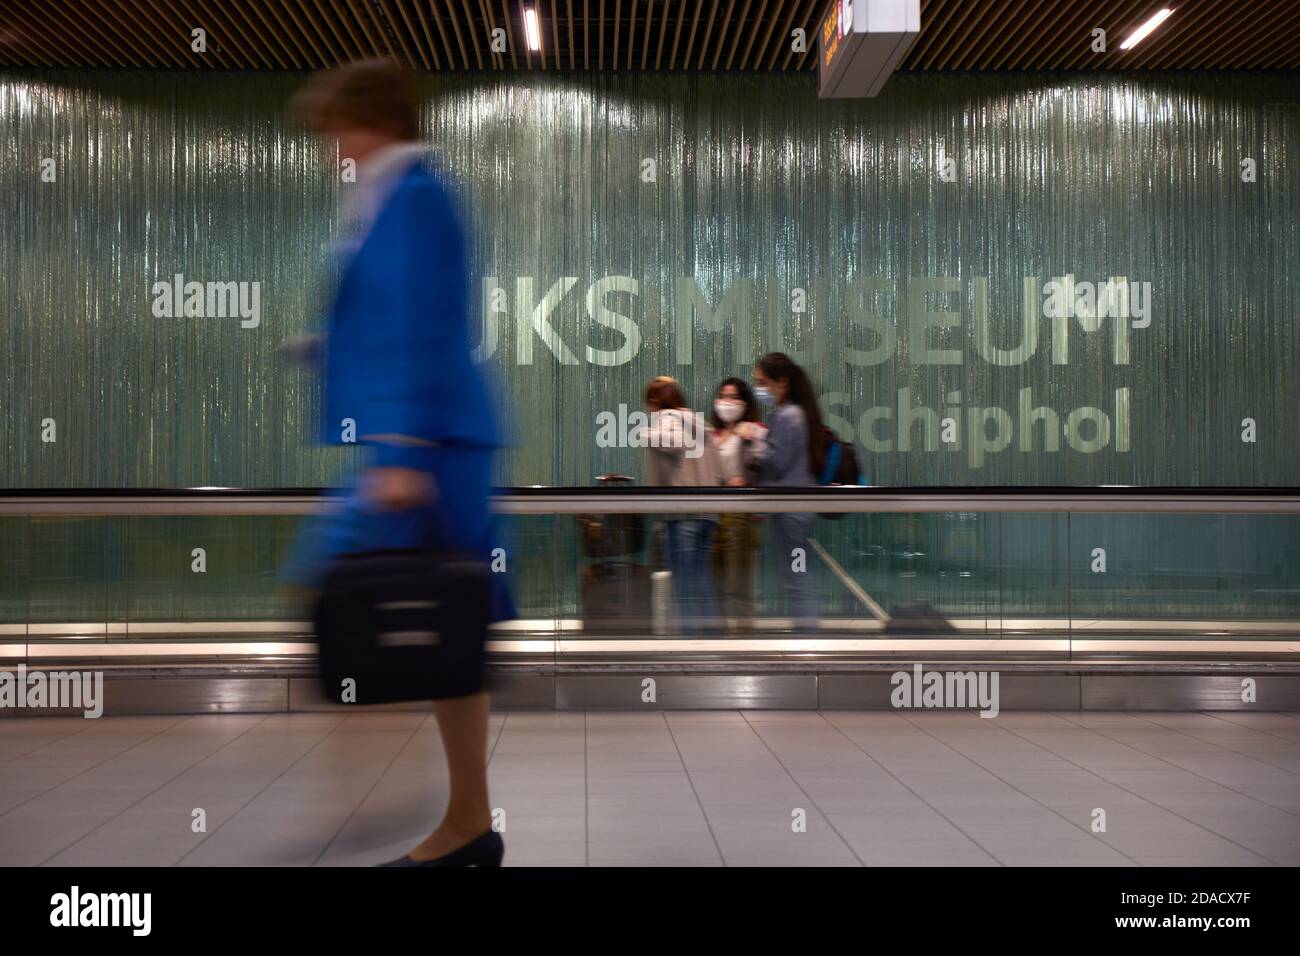 Amsterdam, Holland, 25th September 2020. Traveler wearing protective masks in transit at Schipol airport during the 2020’s COVID-19 pandemic, Amsterdam, Holland, Europe. Credit: Nicholas Tinelli/Alamy Live News. Stock Photo